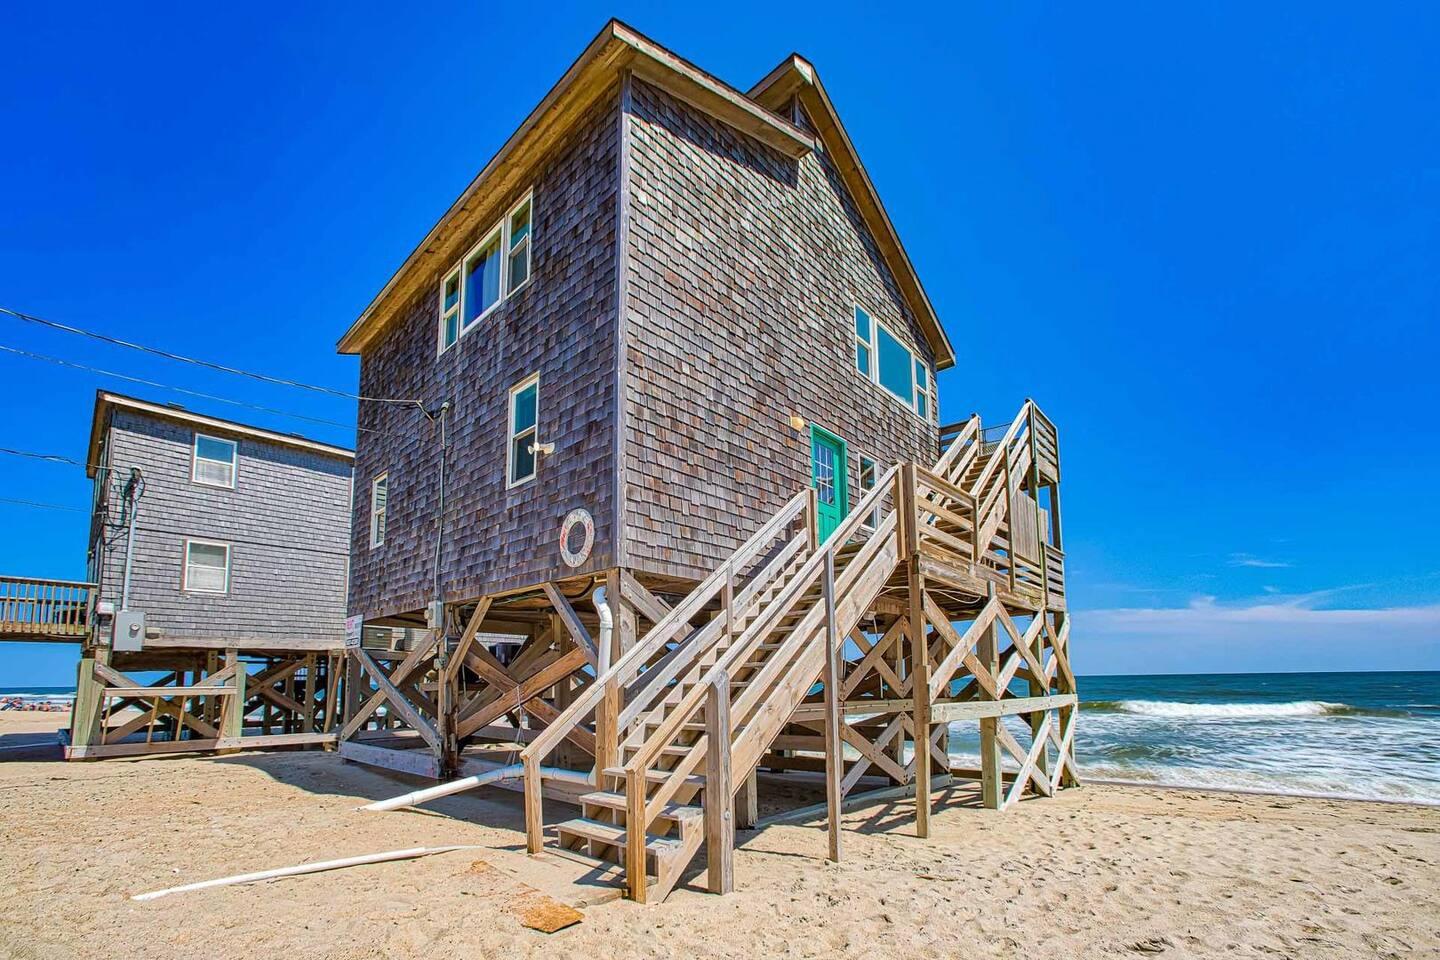 A wooden beachfront house on stilts has a staircase leading up to a porch.